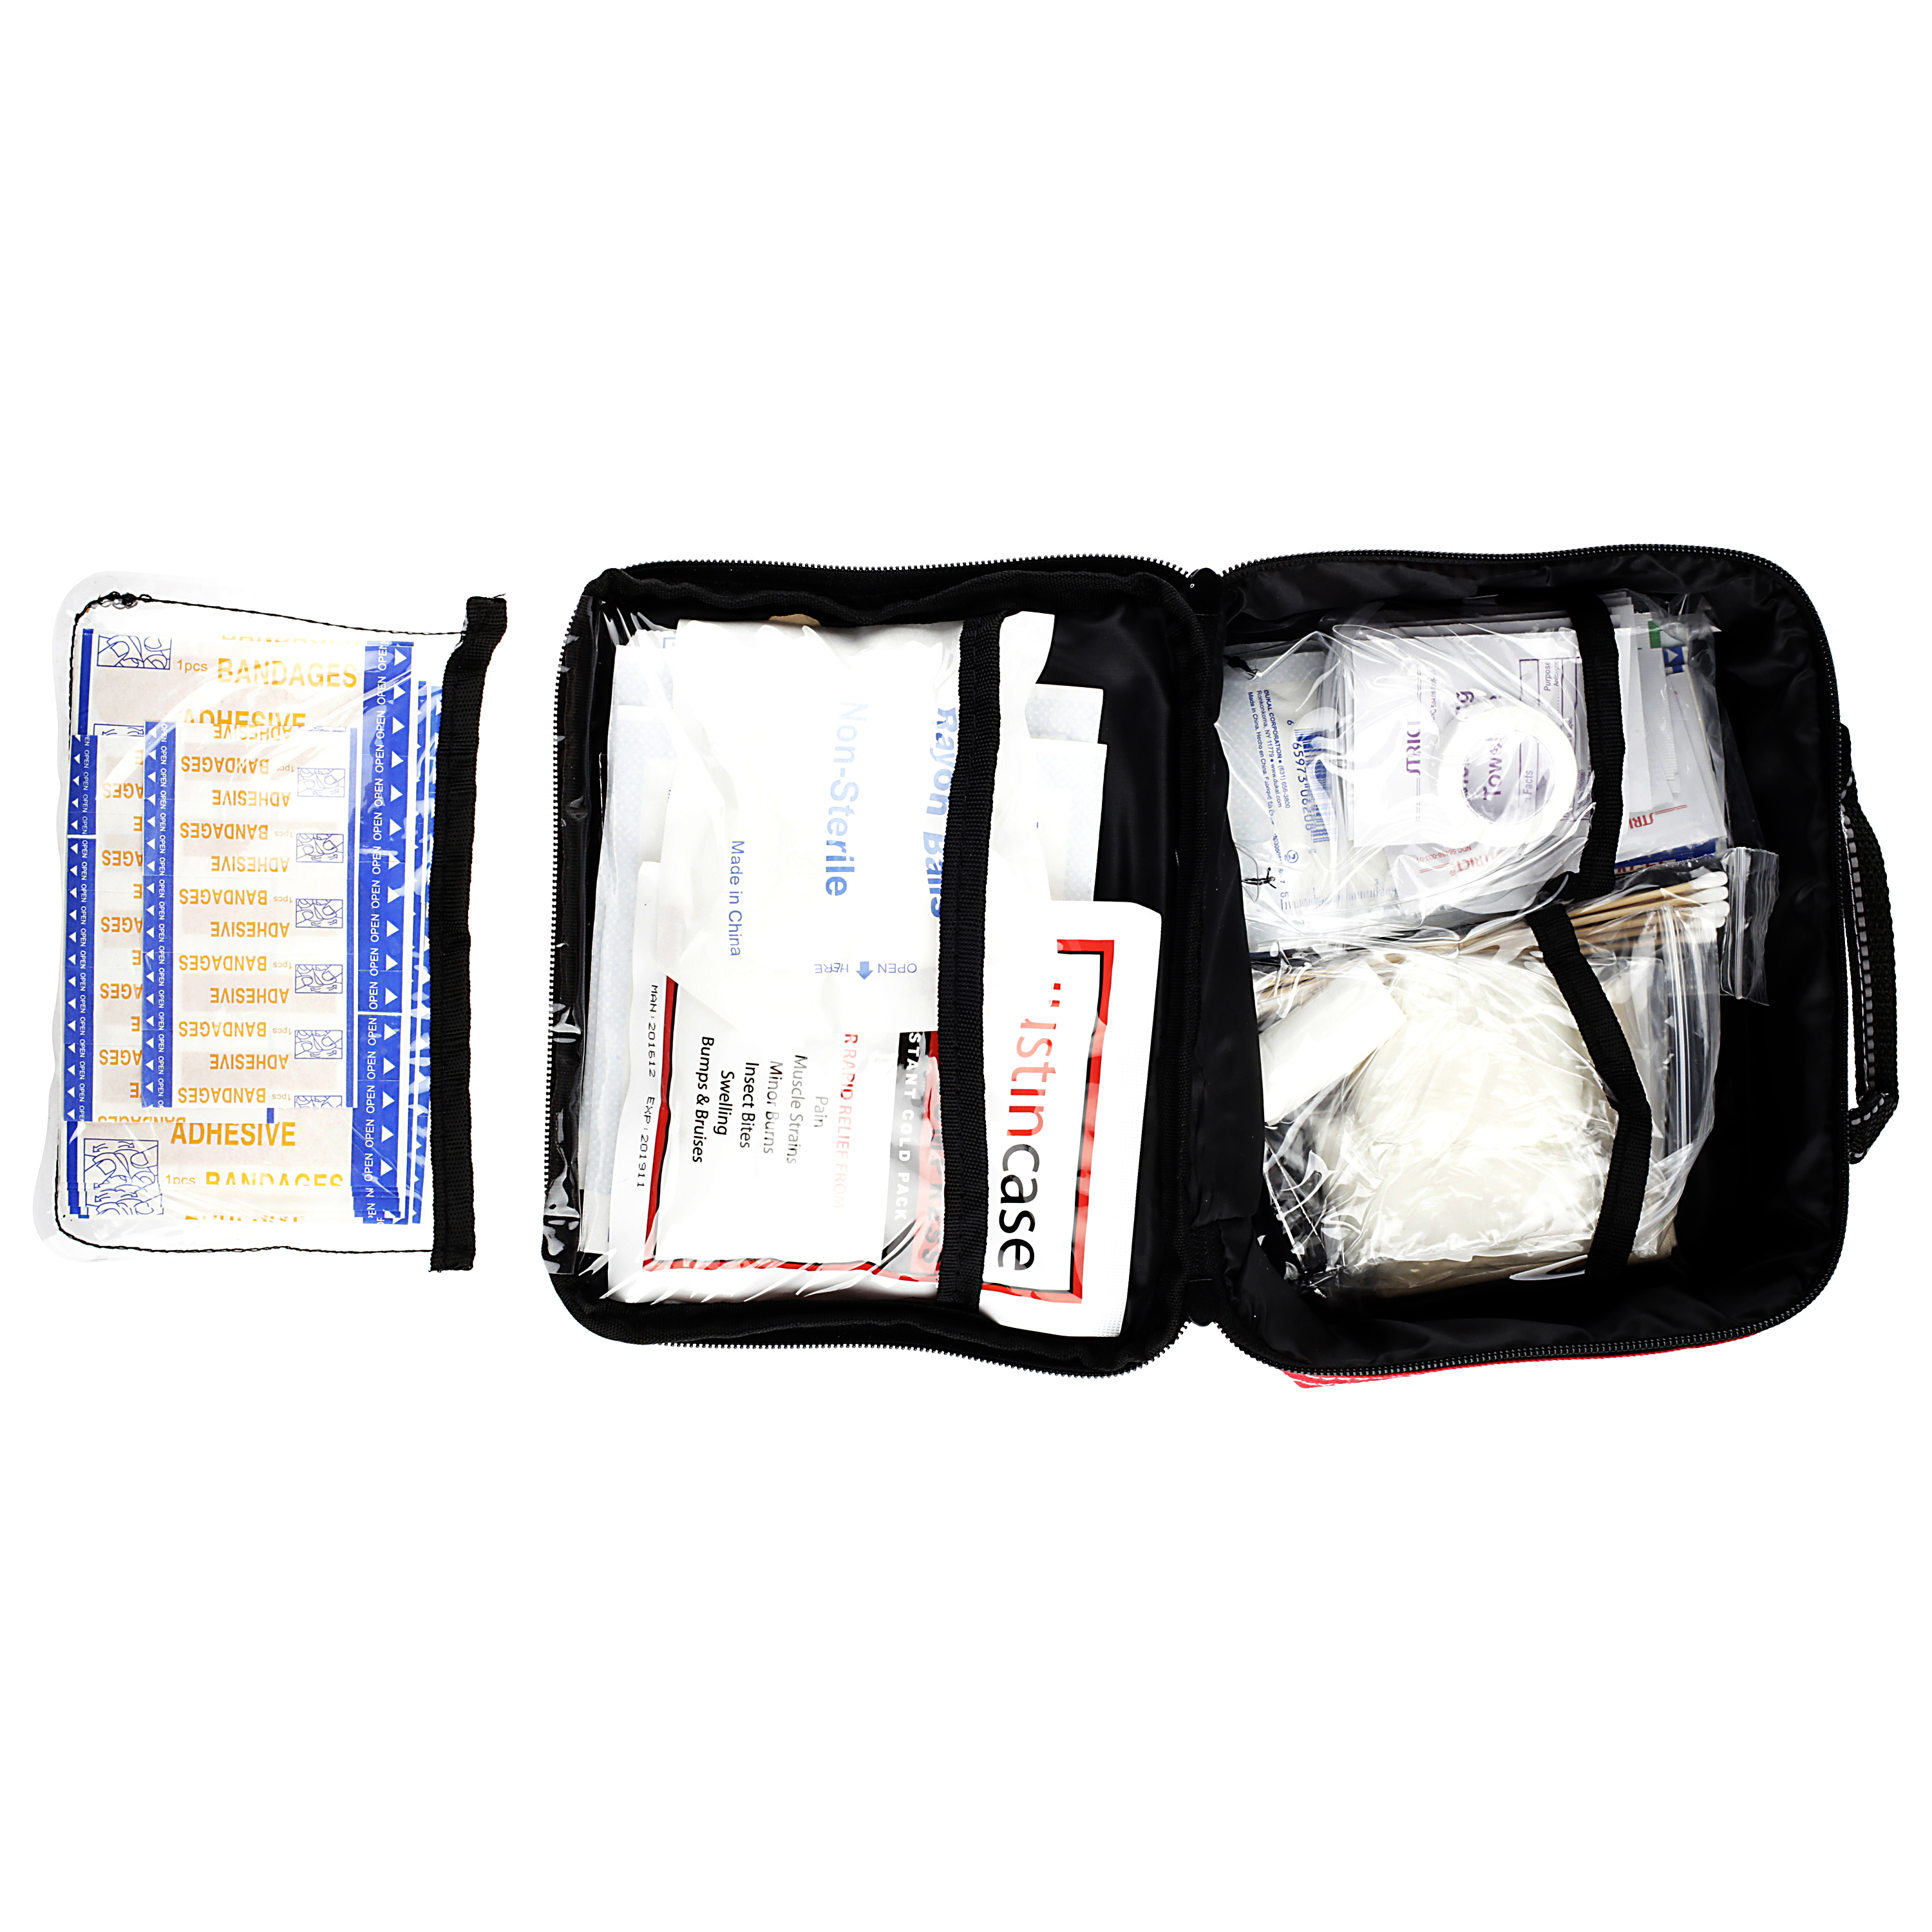 Justin Case Family First Aid Kit - image 4 of 5